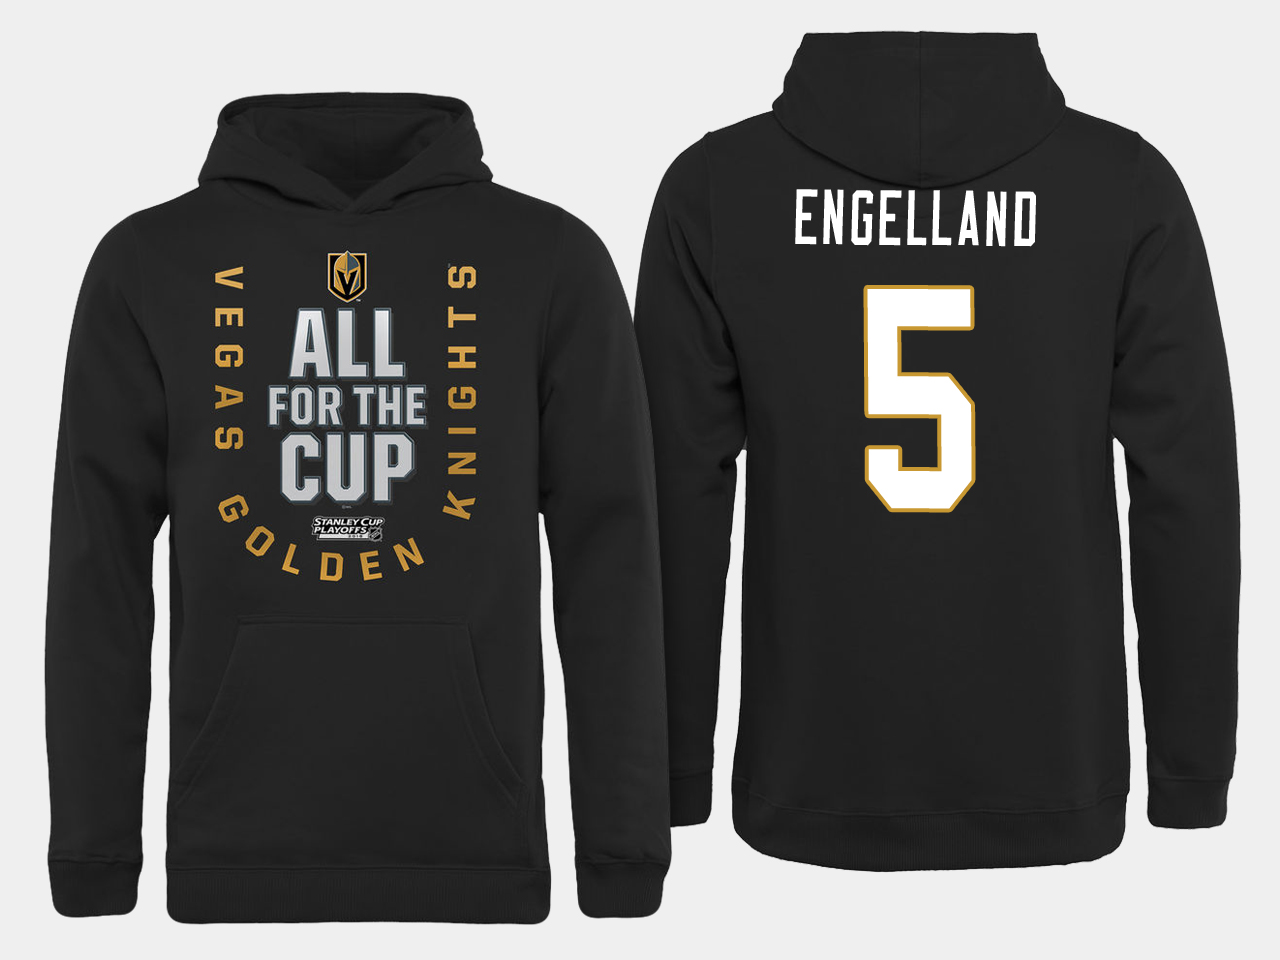 Men NHL Vegas Golden Knights 5 Engelland All for the Cup hoodie